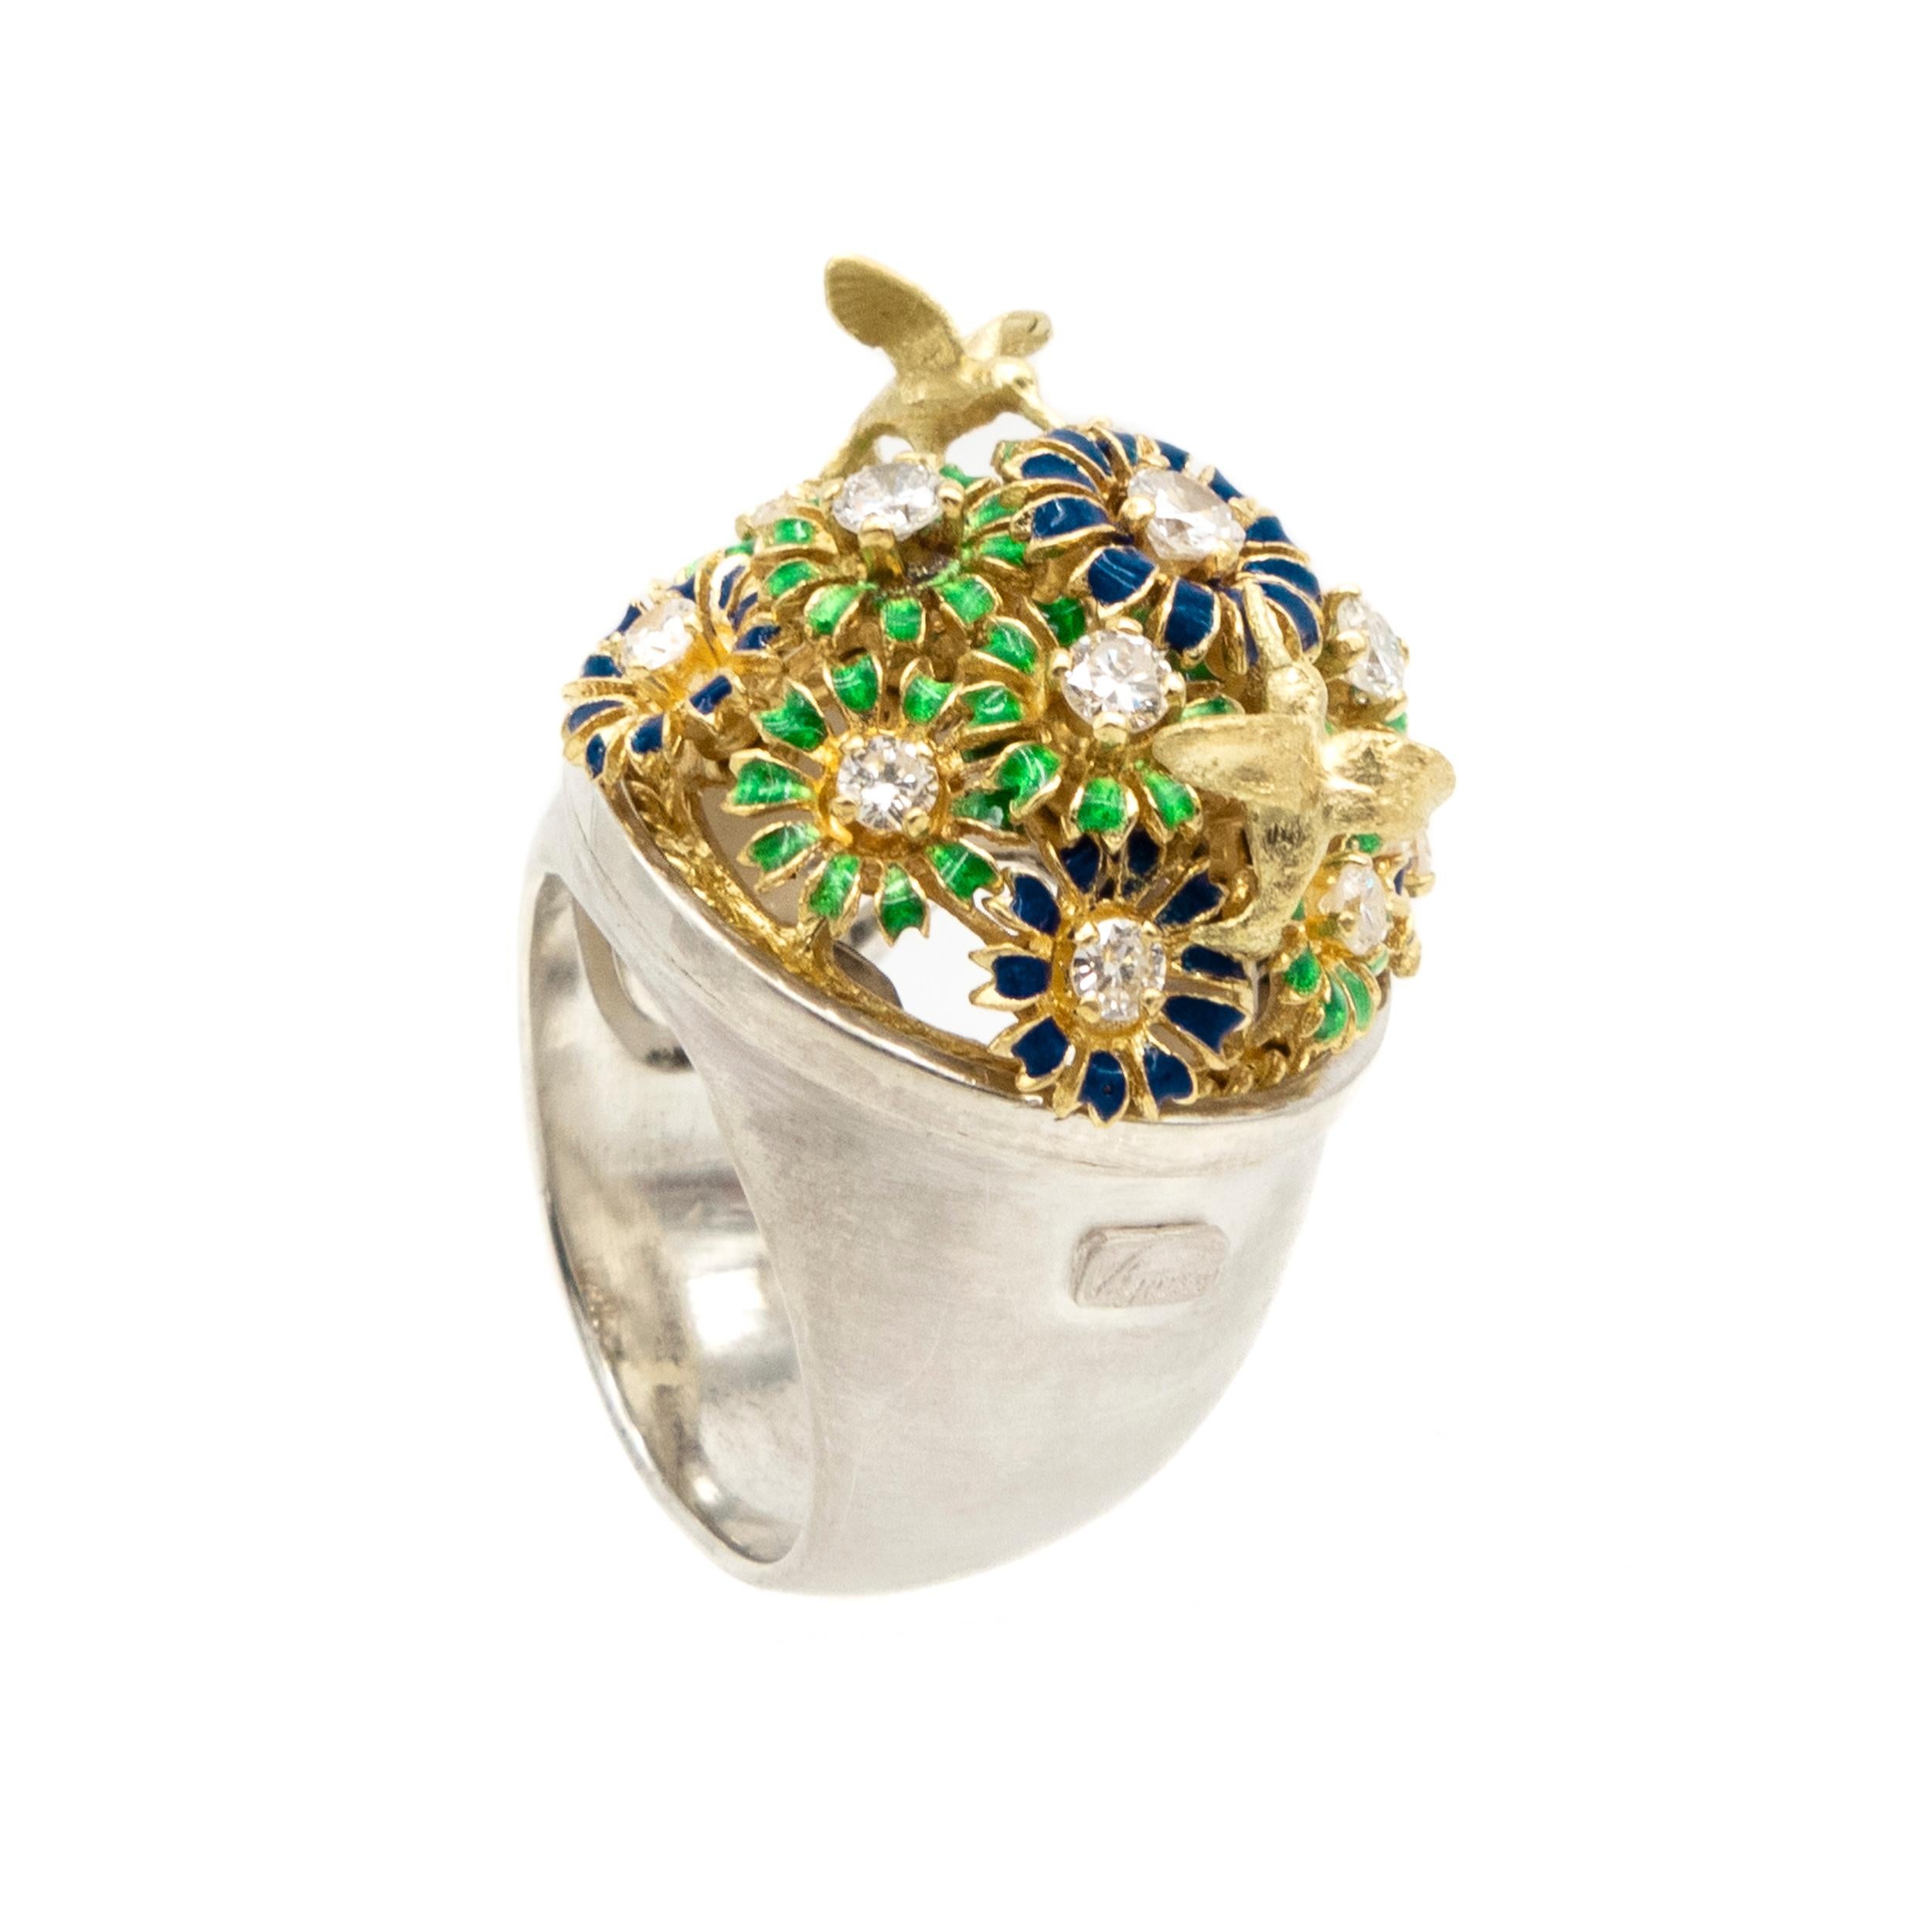 18 Karat Gold Diamonds Nightingale Flowers Enamel Cocktail Silver Ring V Gracia

Behold the exquisite beauty of our Conference of Birds ring, a true testament to nature's elegance and timeless charm. Crafted with intricate artistry, this masterpiece